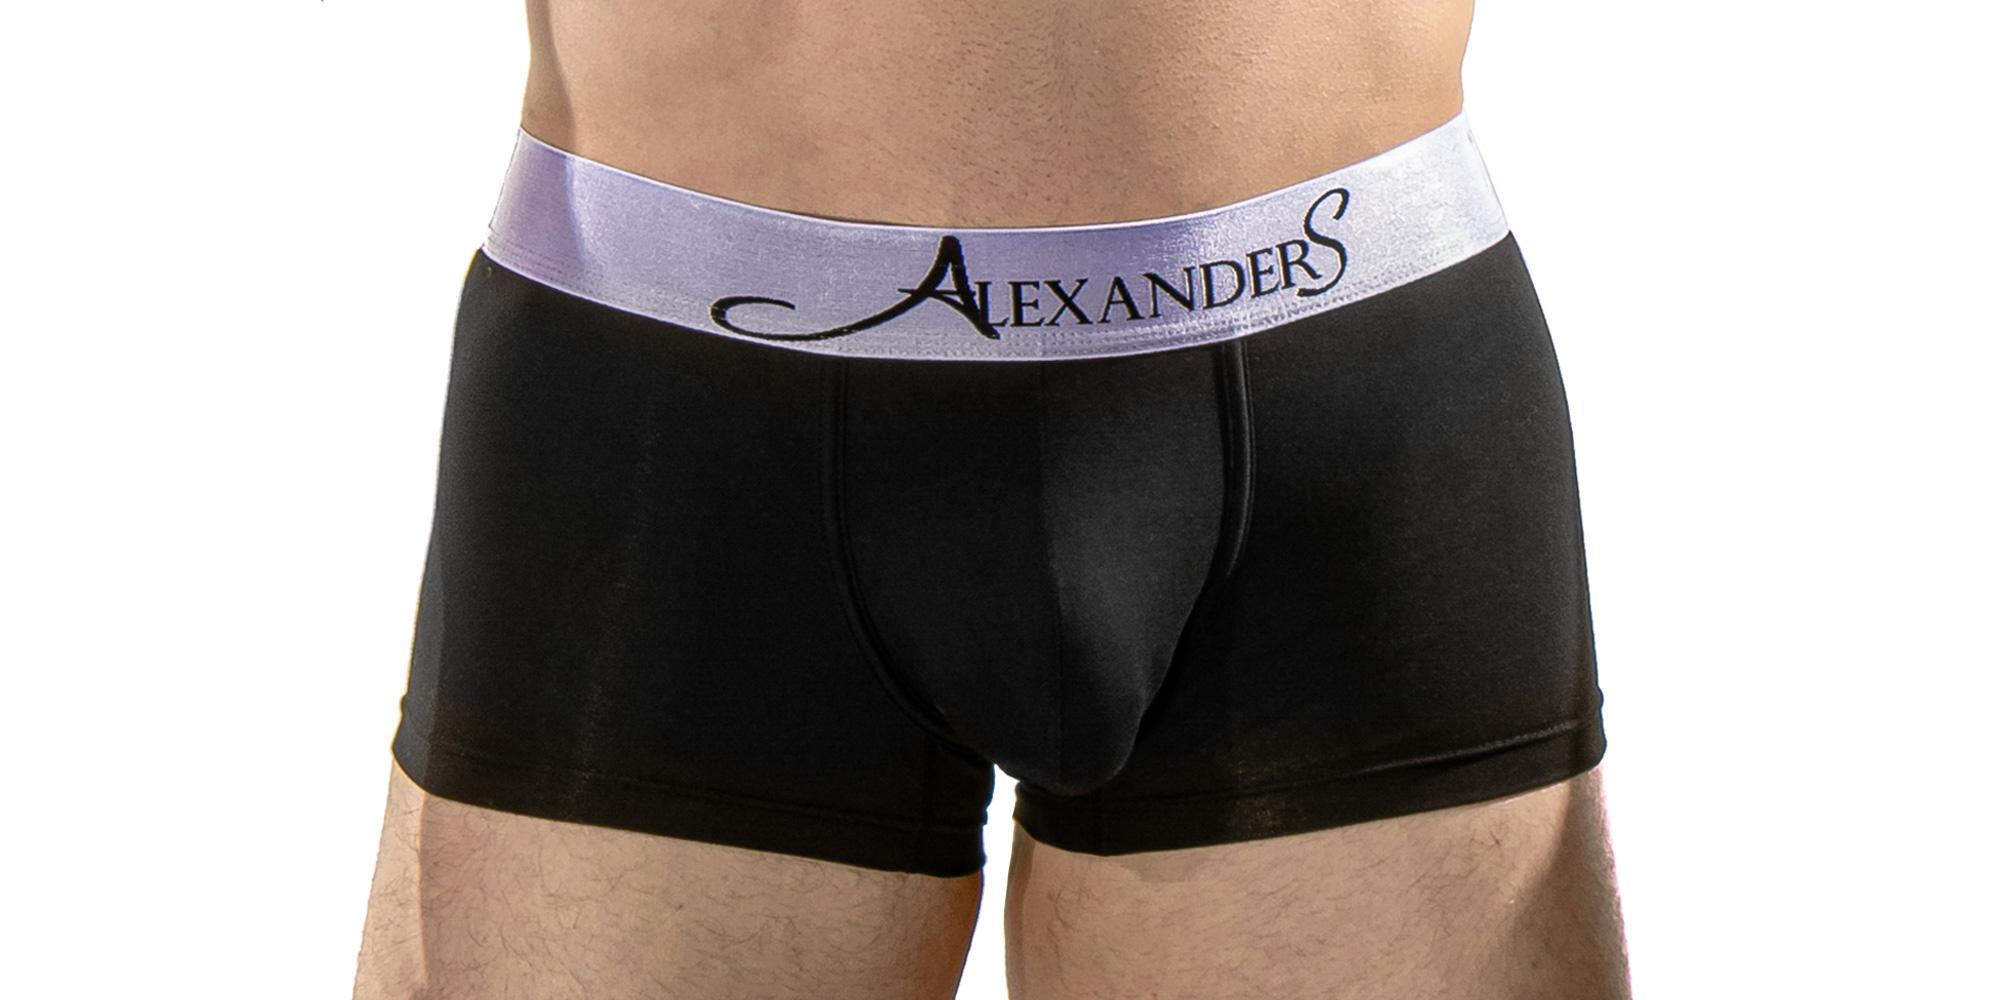 Find your favourite trunks from AlexanderS range, featuring the latest styles and best fits for ultimate comfort. These trunks are perfect for any season.